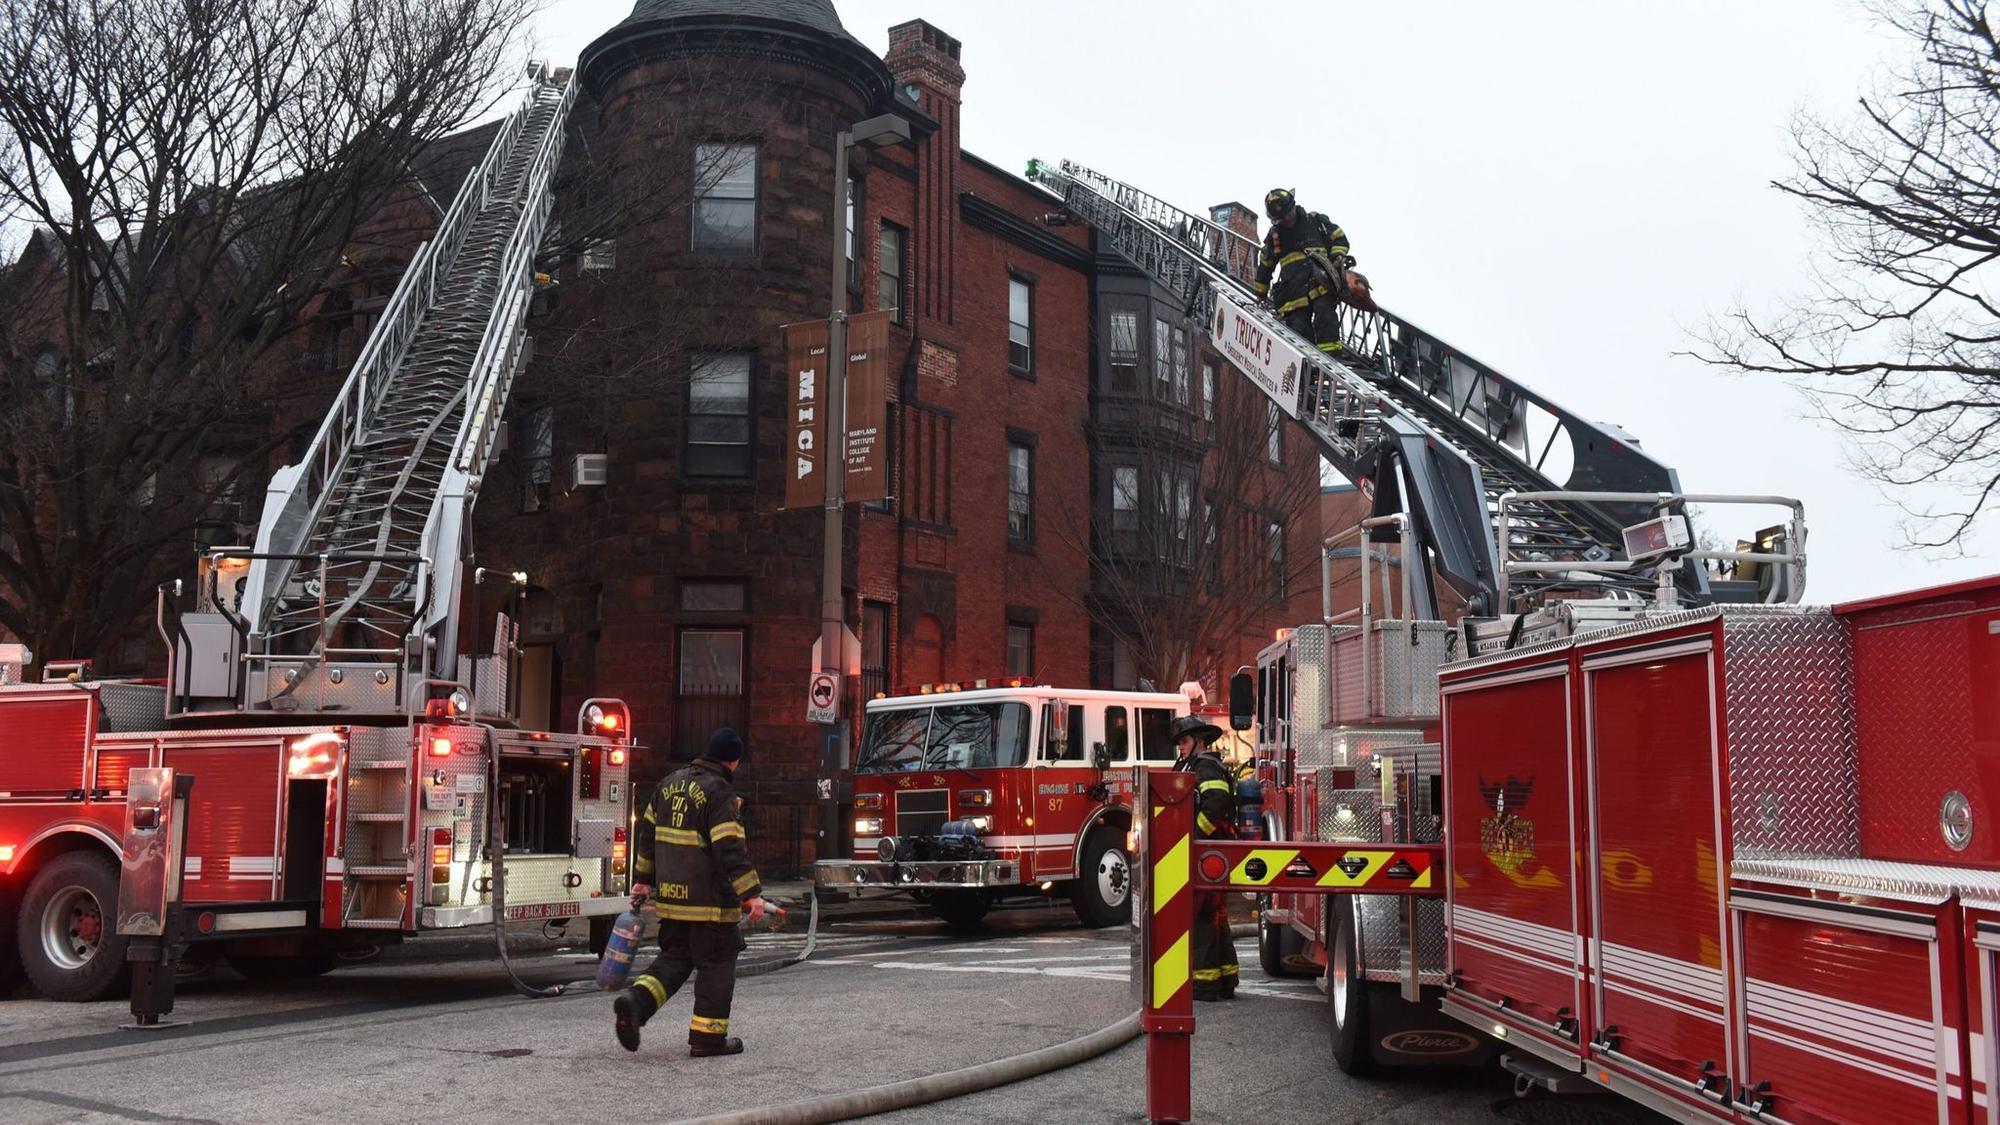 Bolton Hill apartment building damaged in fire Tuesday morning, Baltimore officials ...2000 x 1125